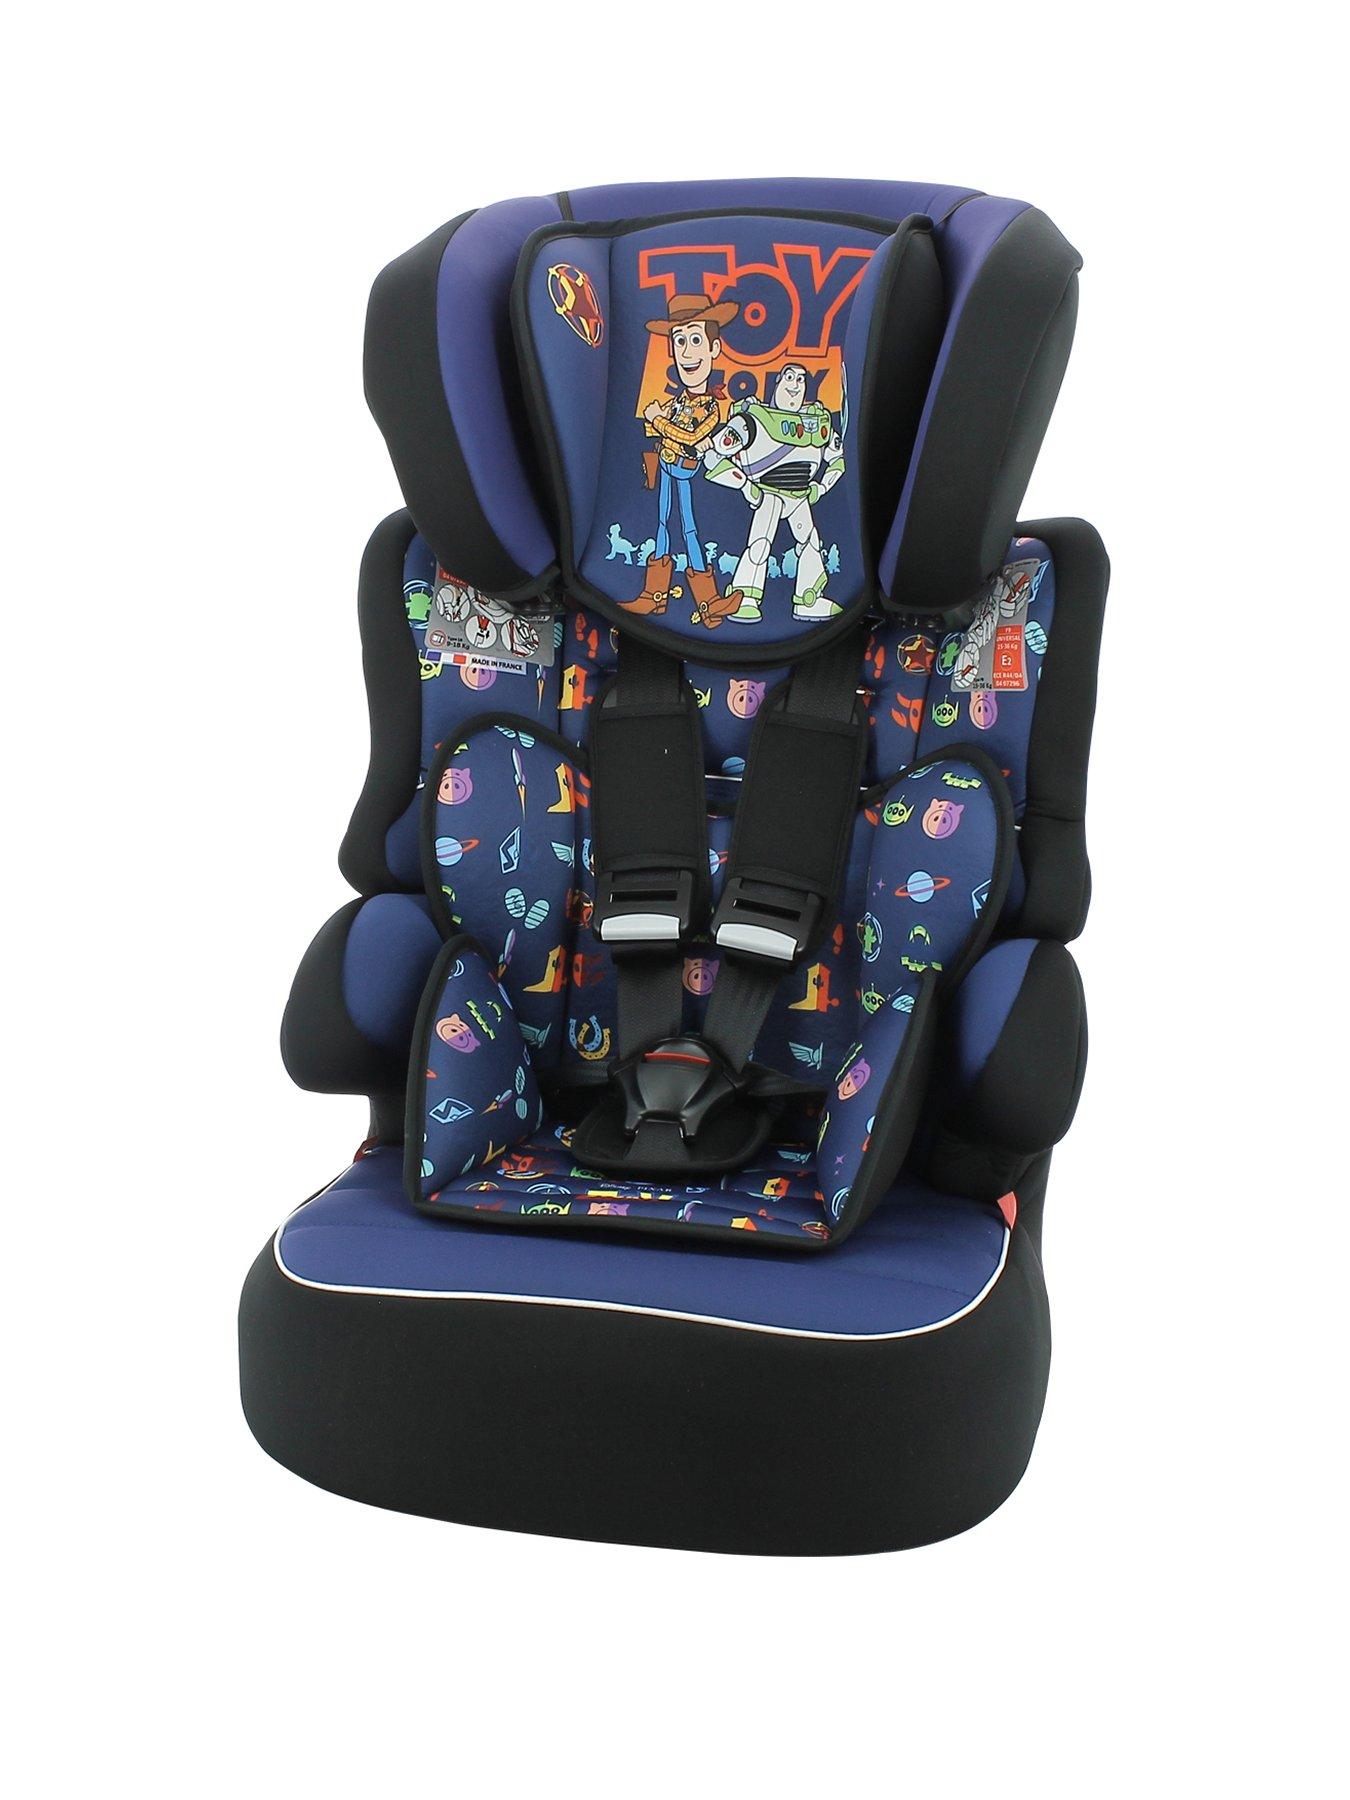 toy story booster seat